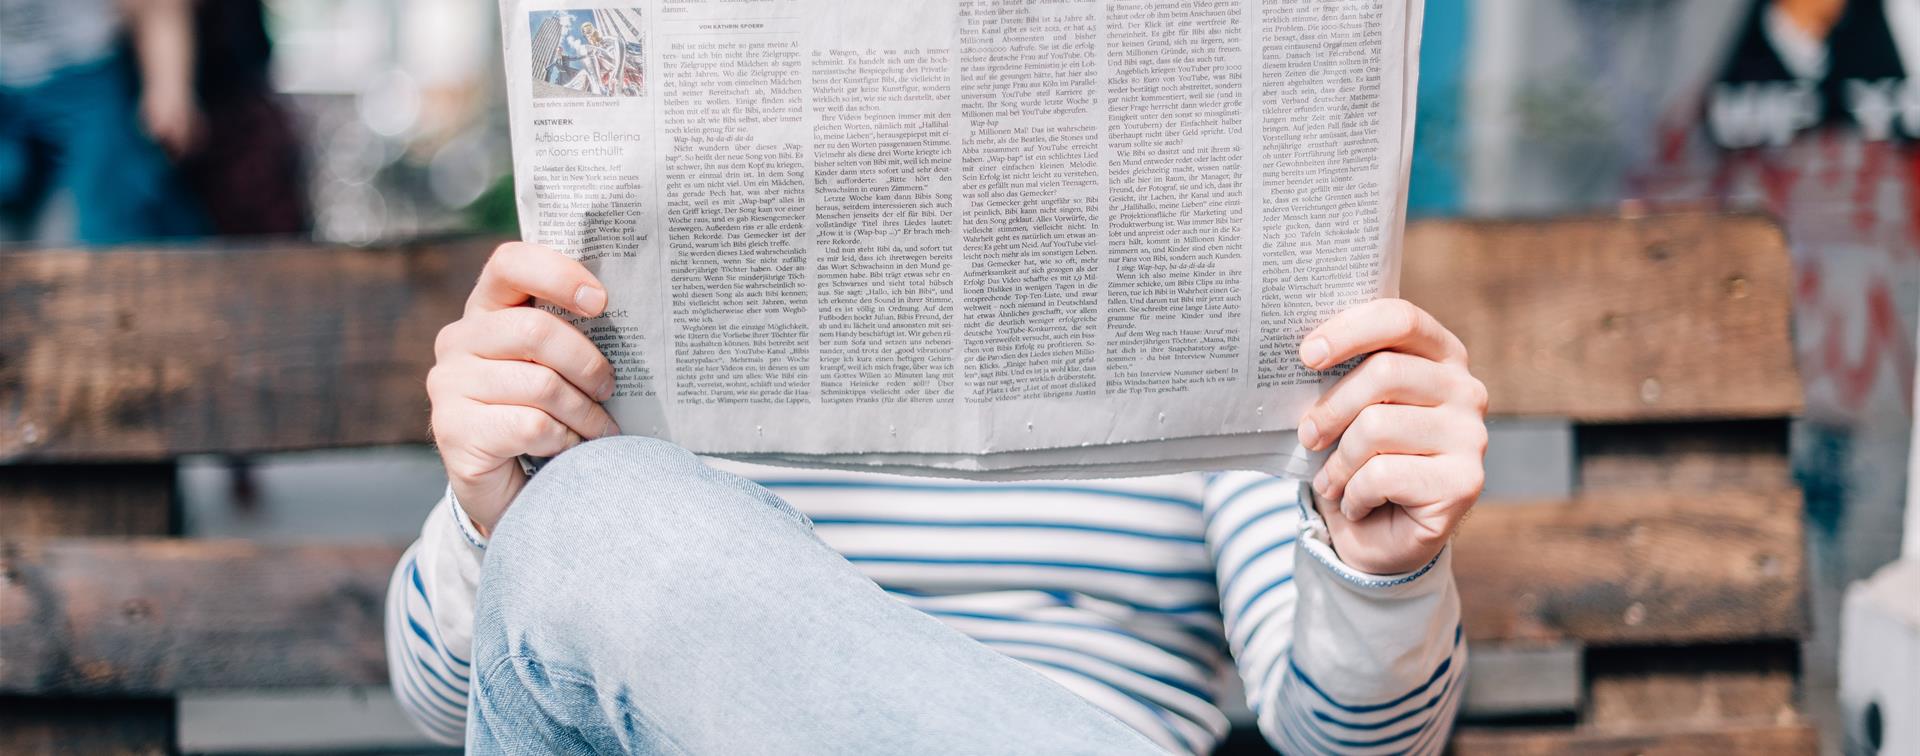 A picture of a man reading a newspaper